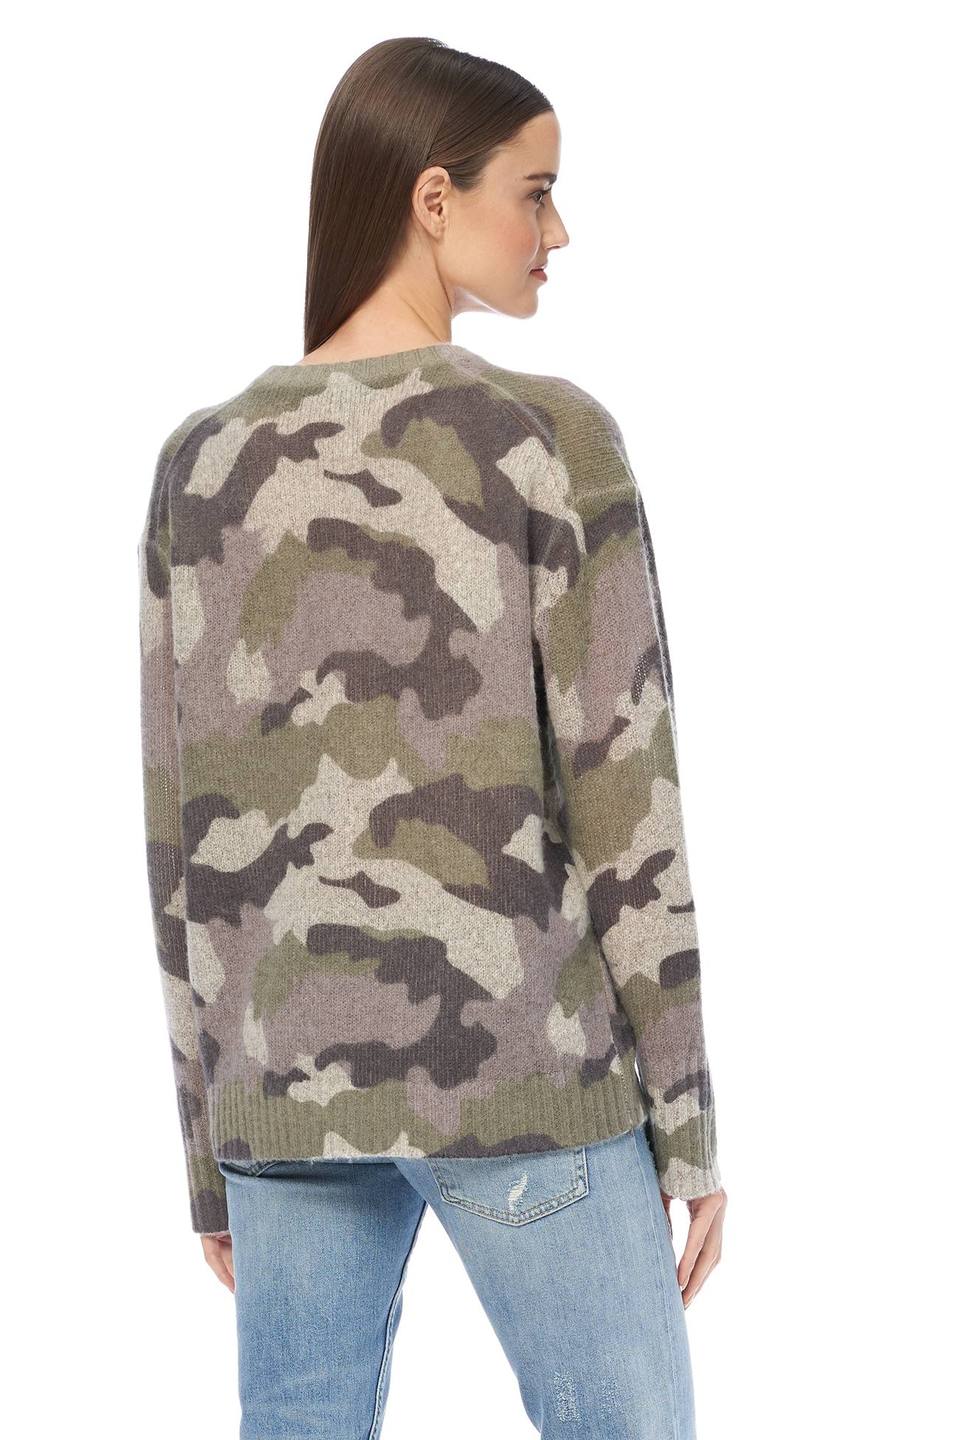 EMERIE SWEATER - Kingfisher Road - Online Boutique